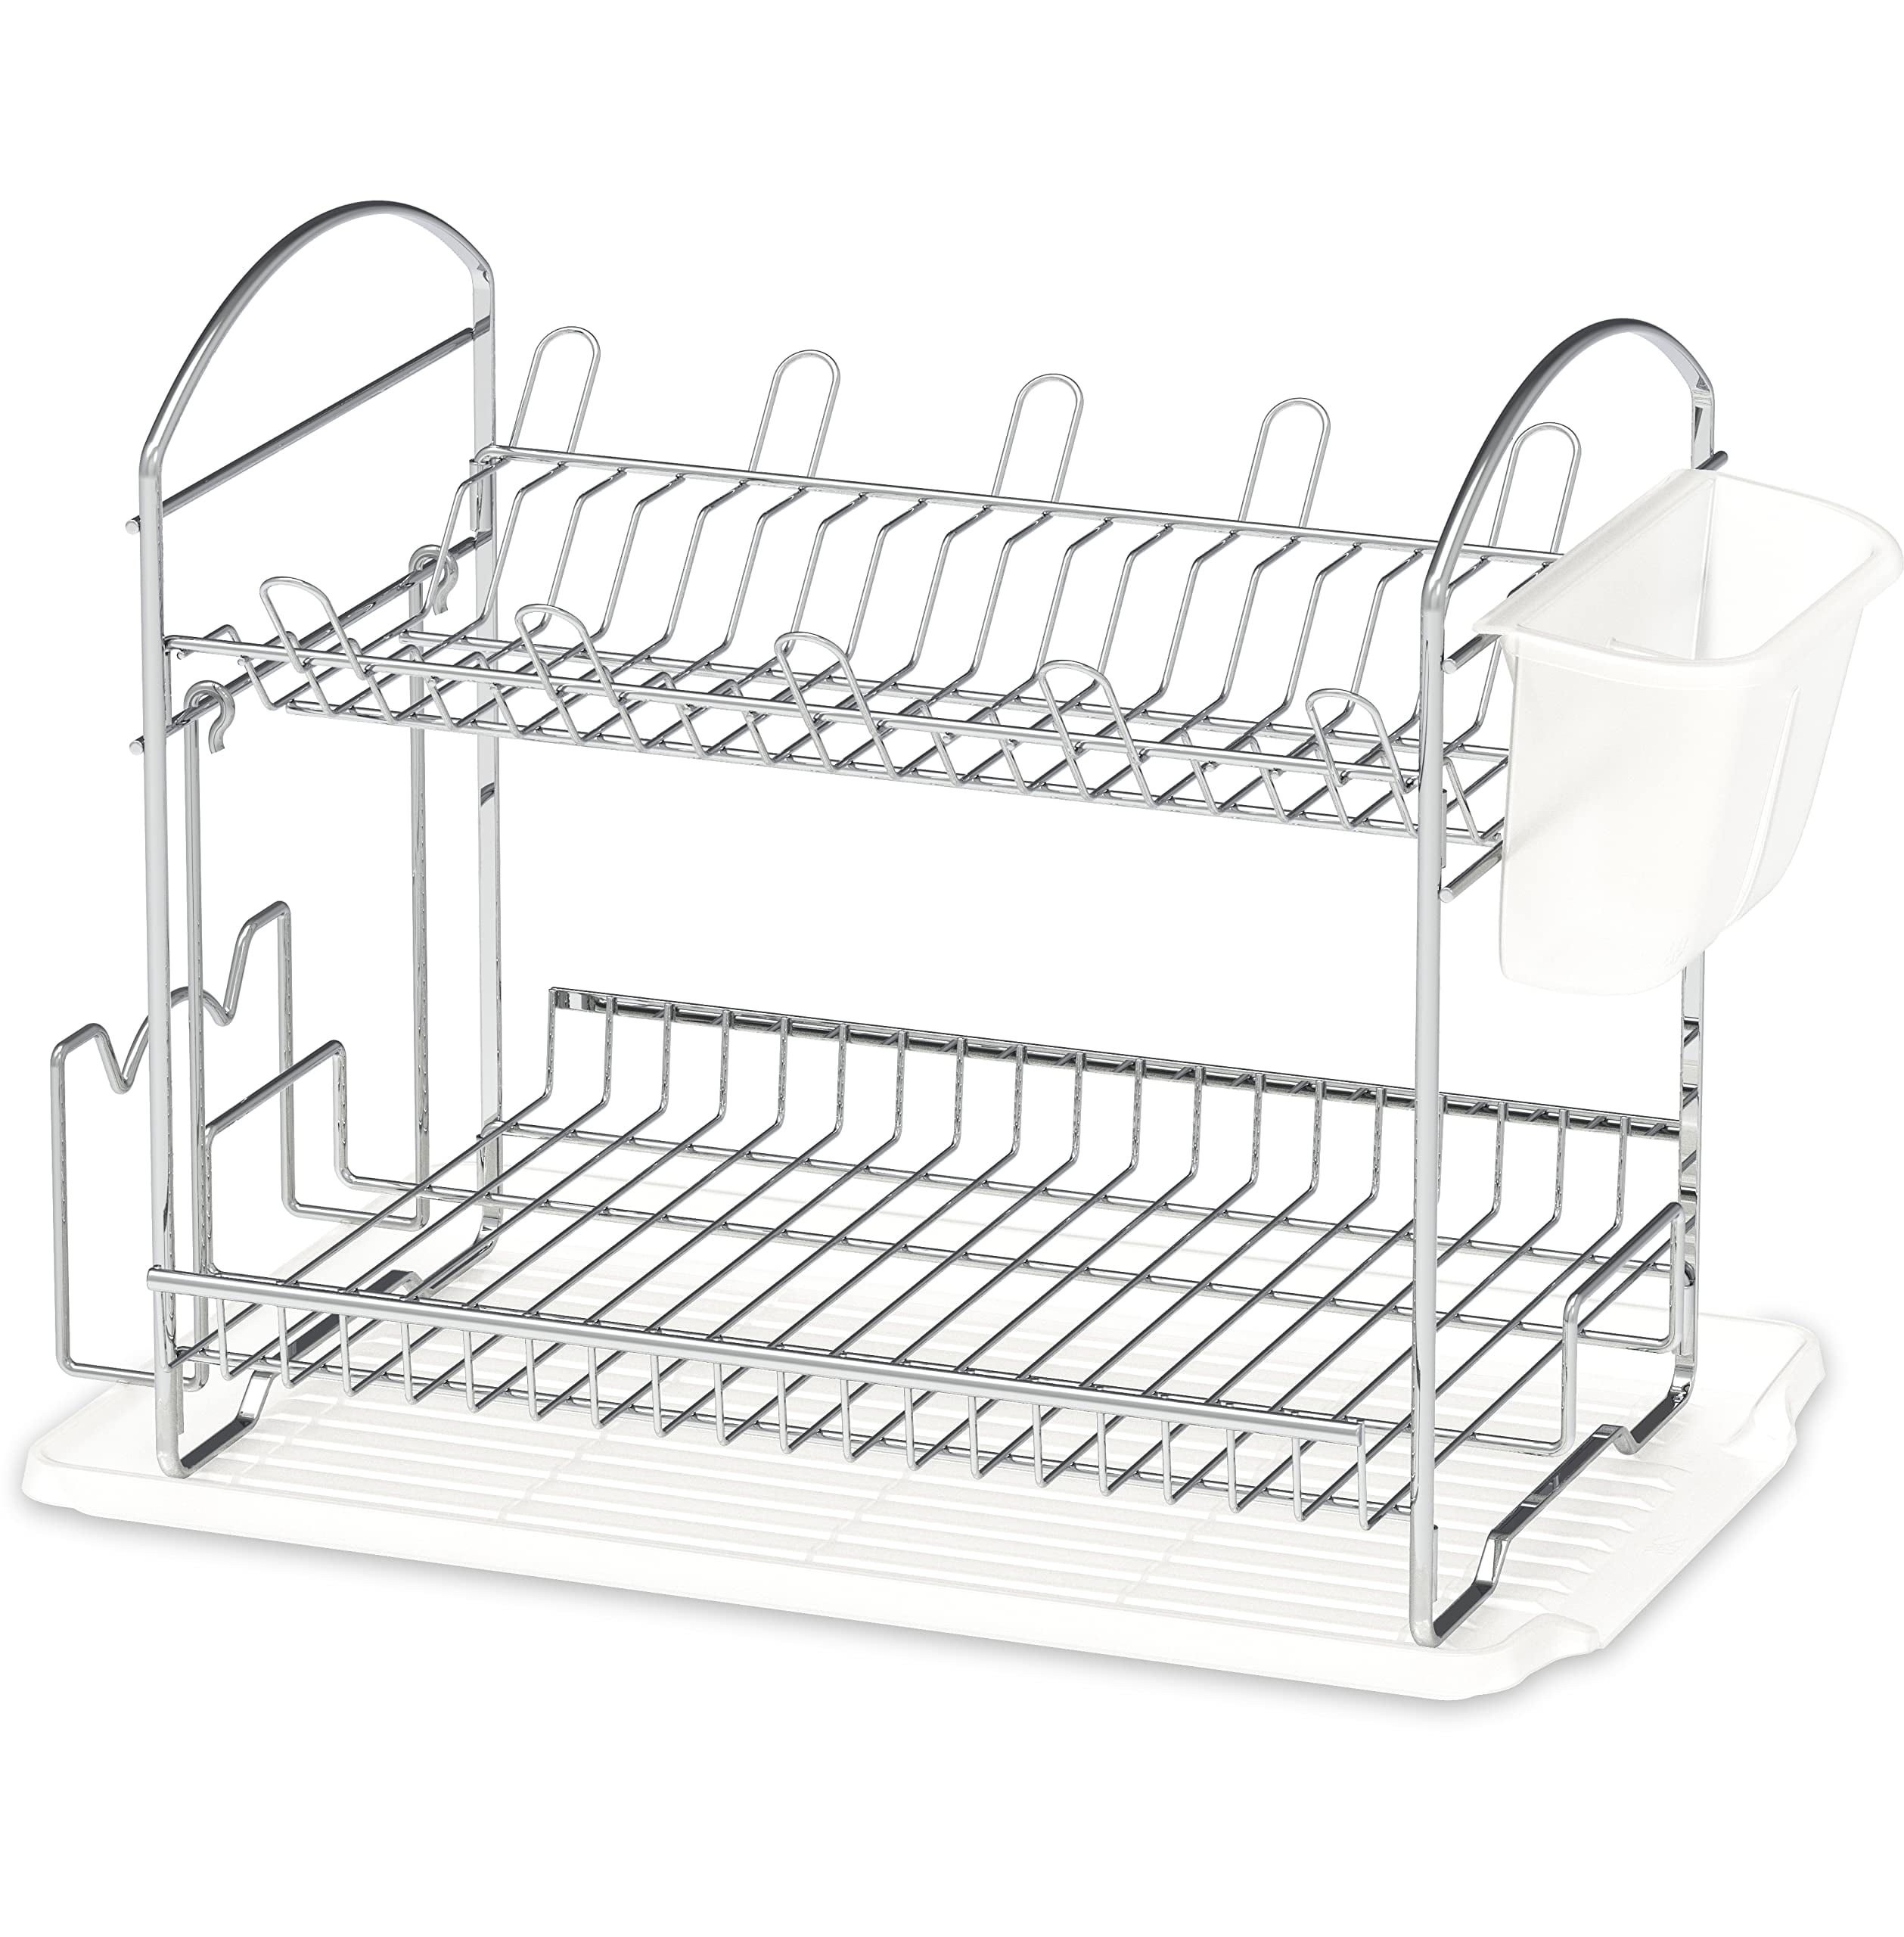 Simple Houseware 2-Tier Dish Rack with Drainboard, White